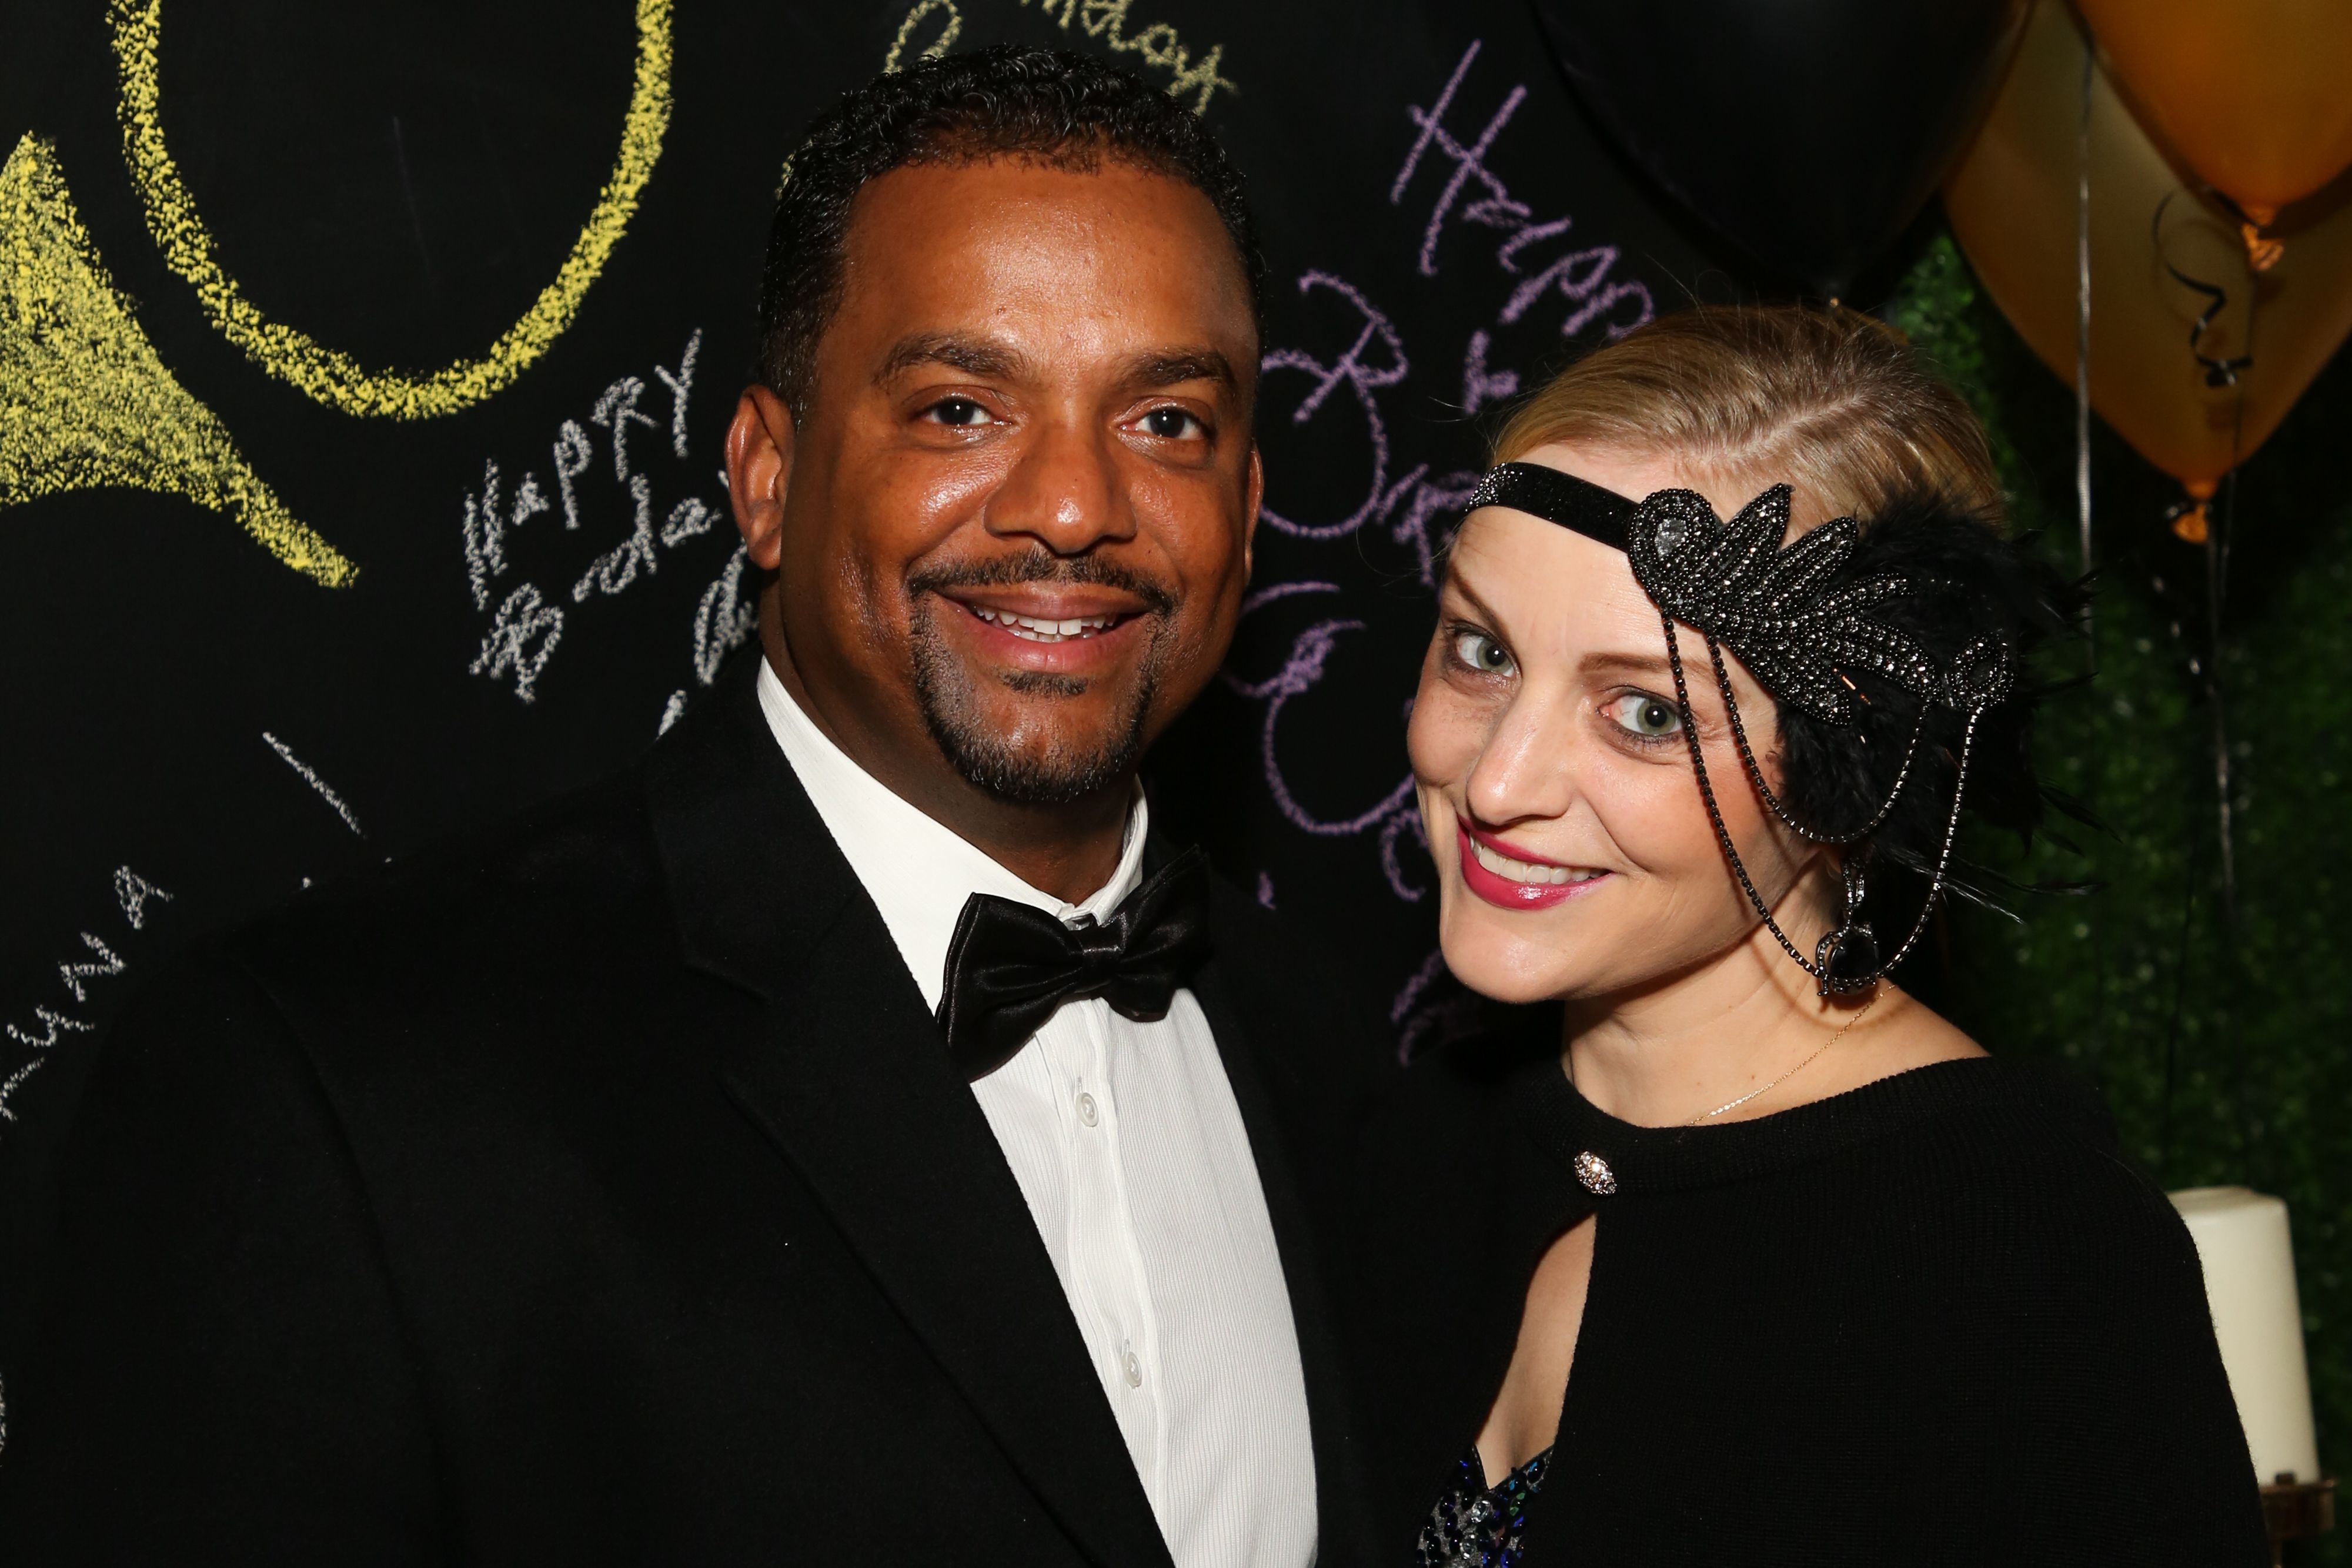 Actor Alfonso Ribeiro and his wife Angela Unkrich attend the birthday celebration of Keo Motsepe on November 30, 2019 | Photo: Getty Images